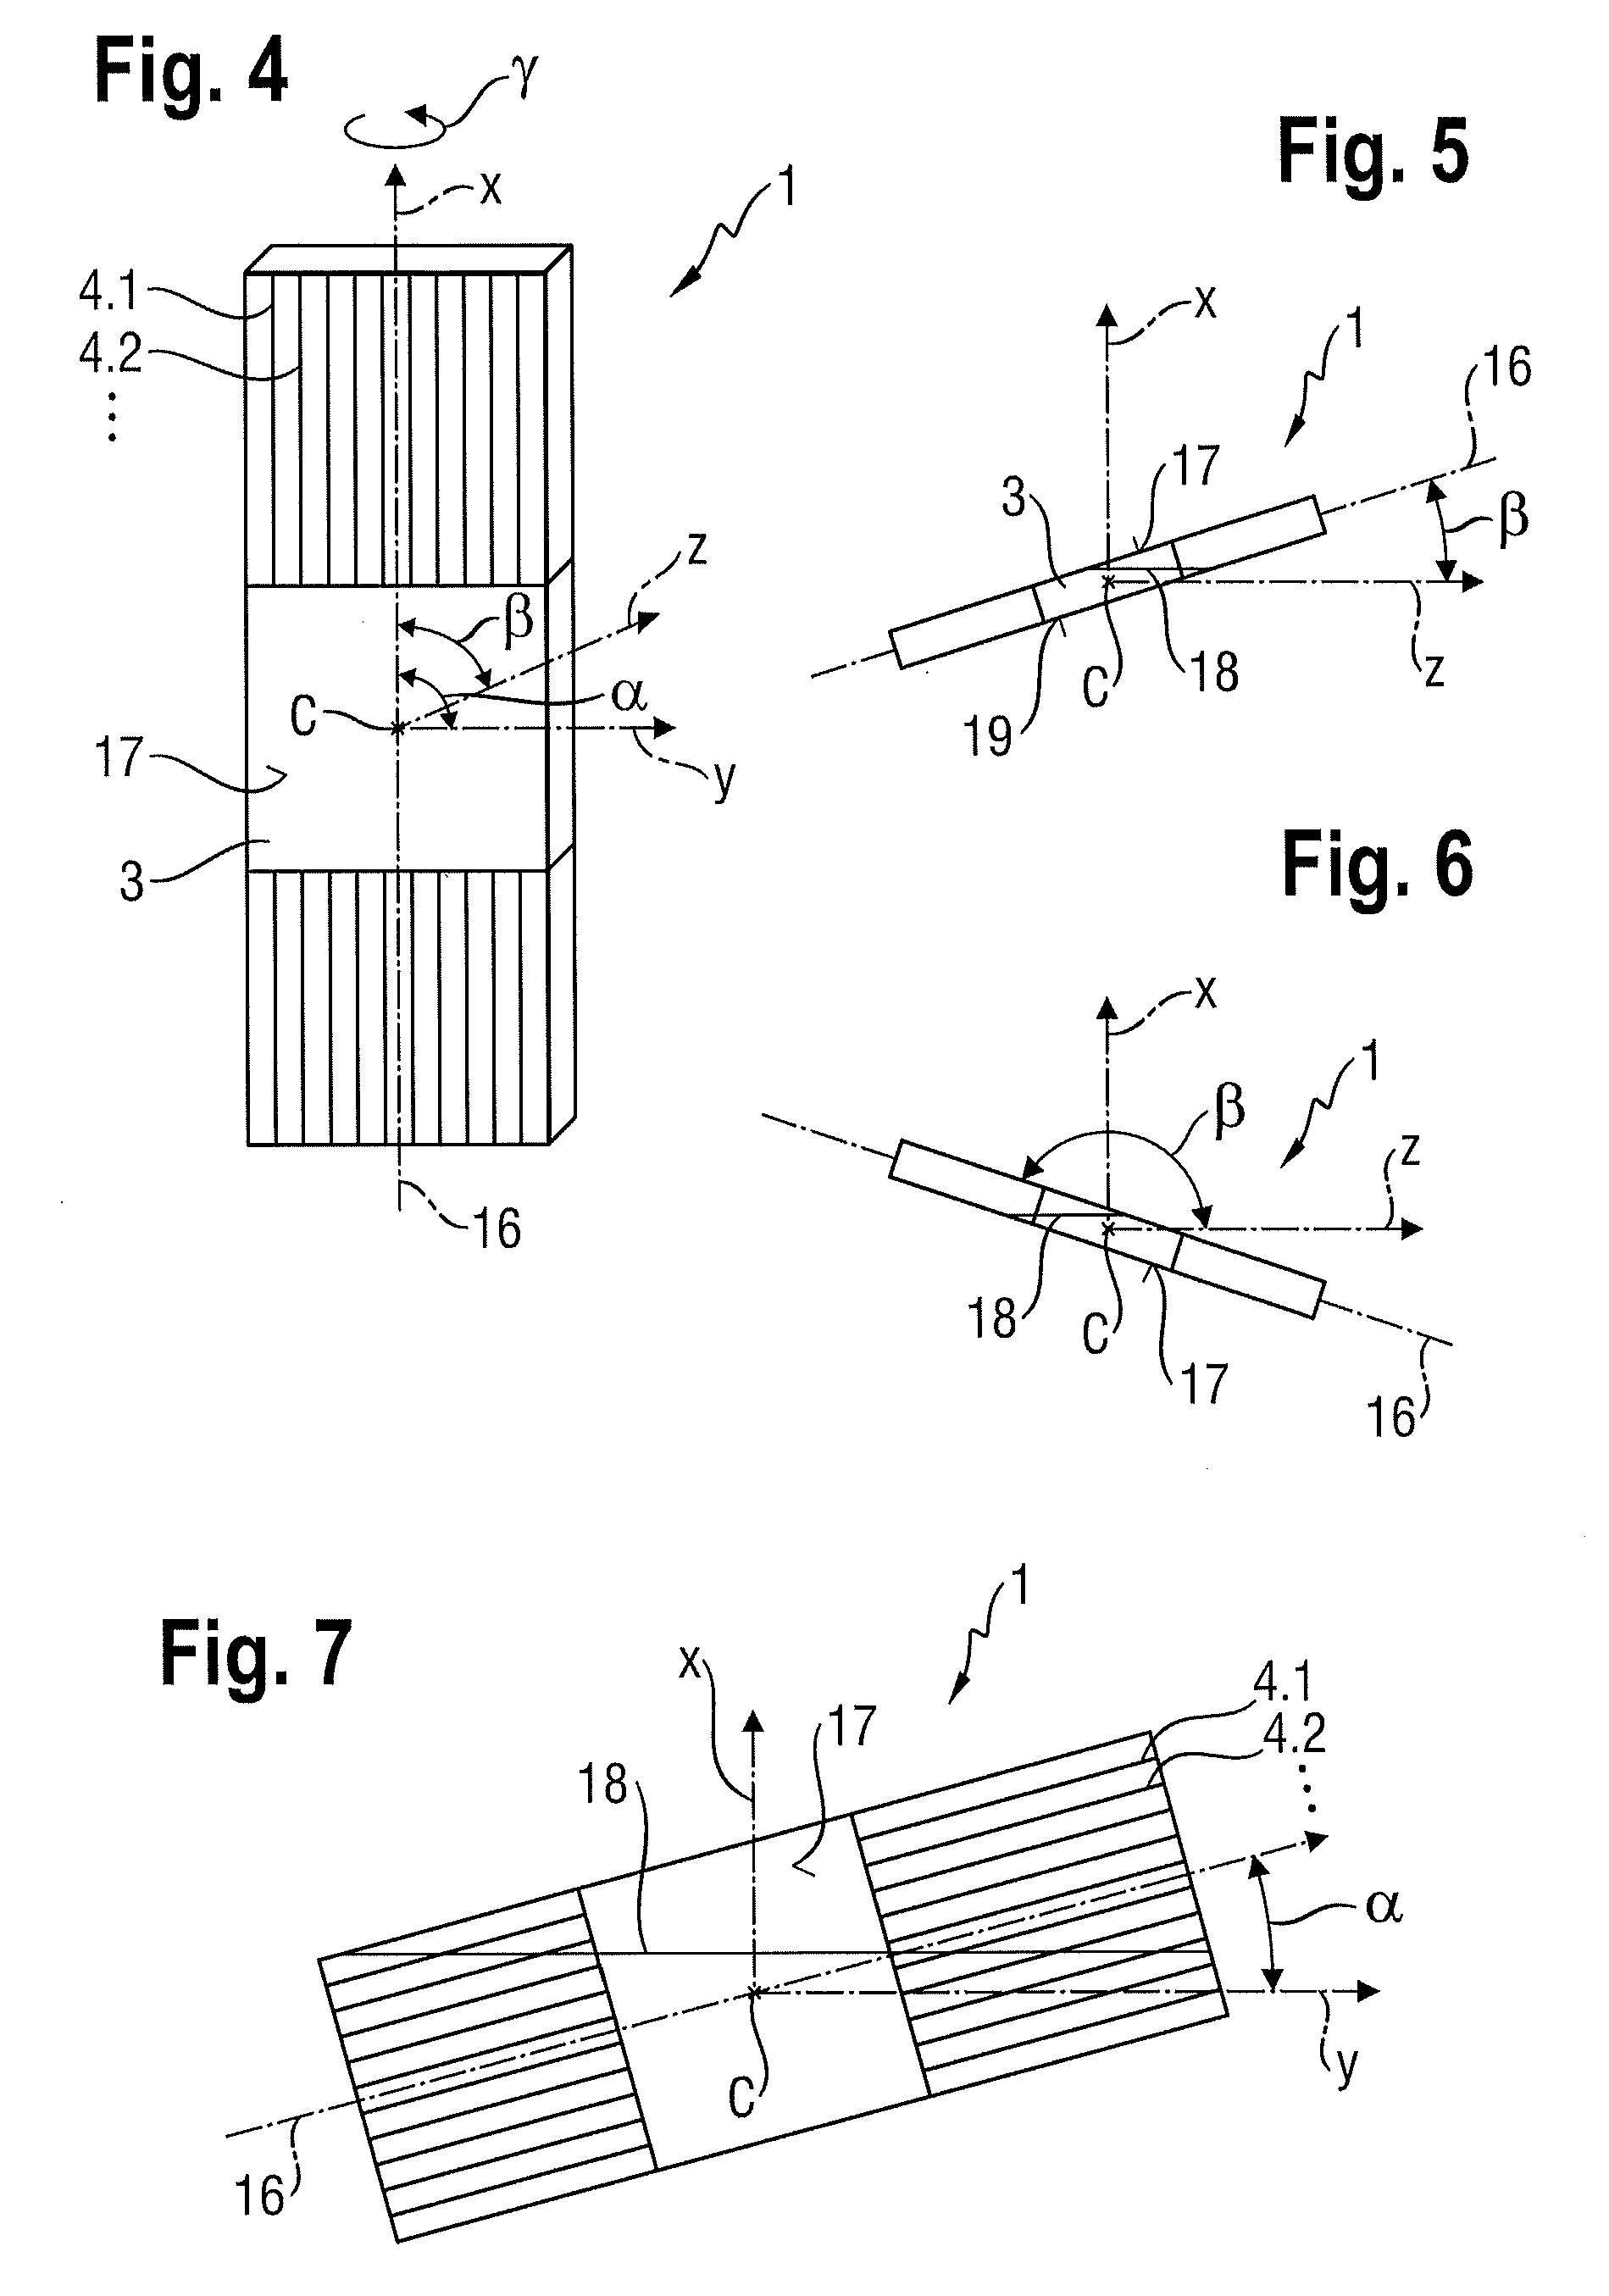 Anti-gravity thermosyphon heat exchanger and a power module